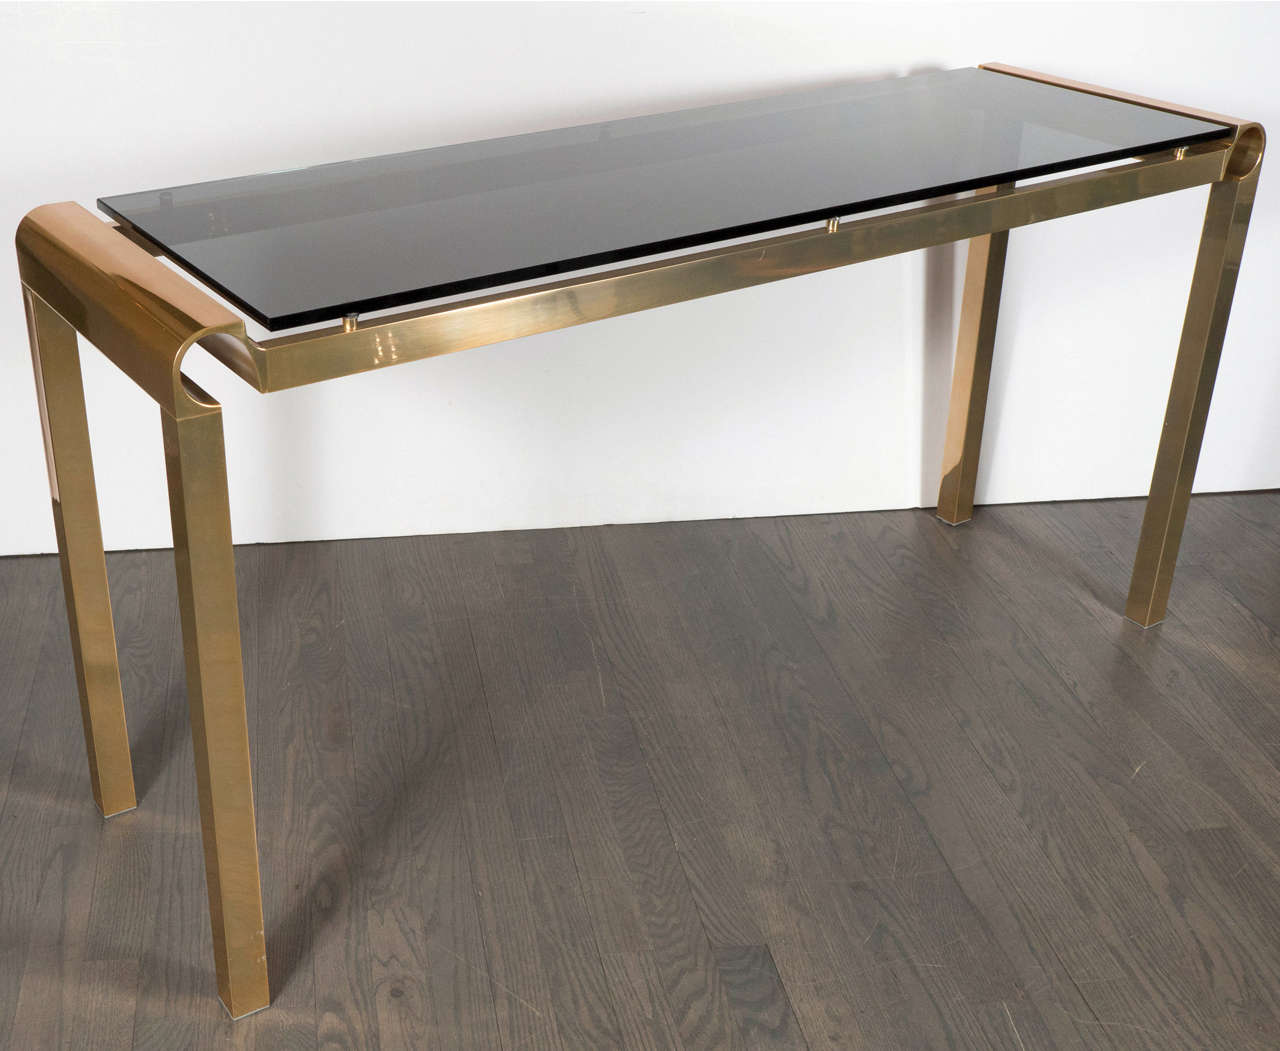 This superb Mid-Century Modernist console in the manner of Karl Springer features a floating smoked glass top with a stylized linear brass frame and detailing.